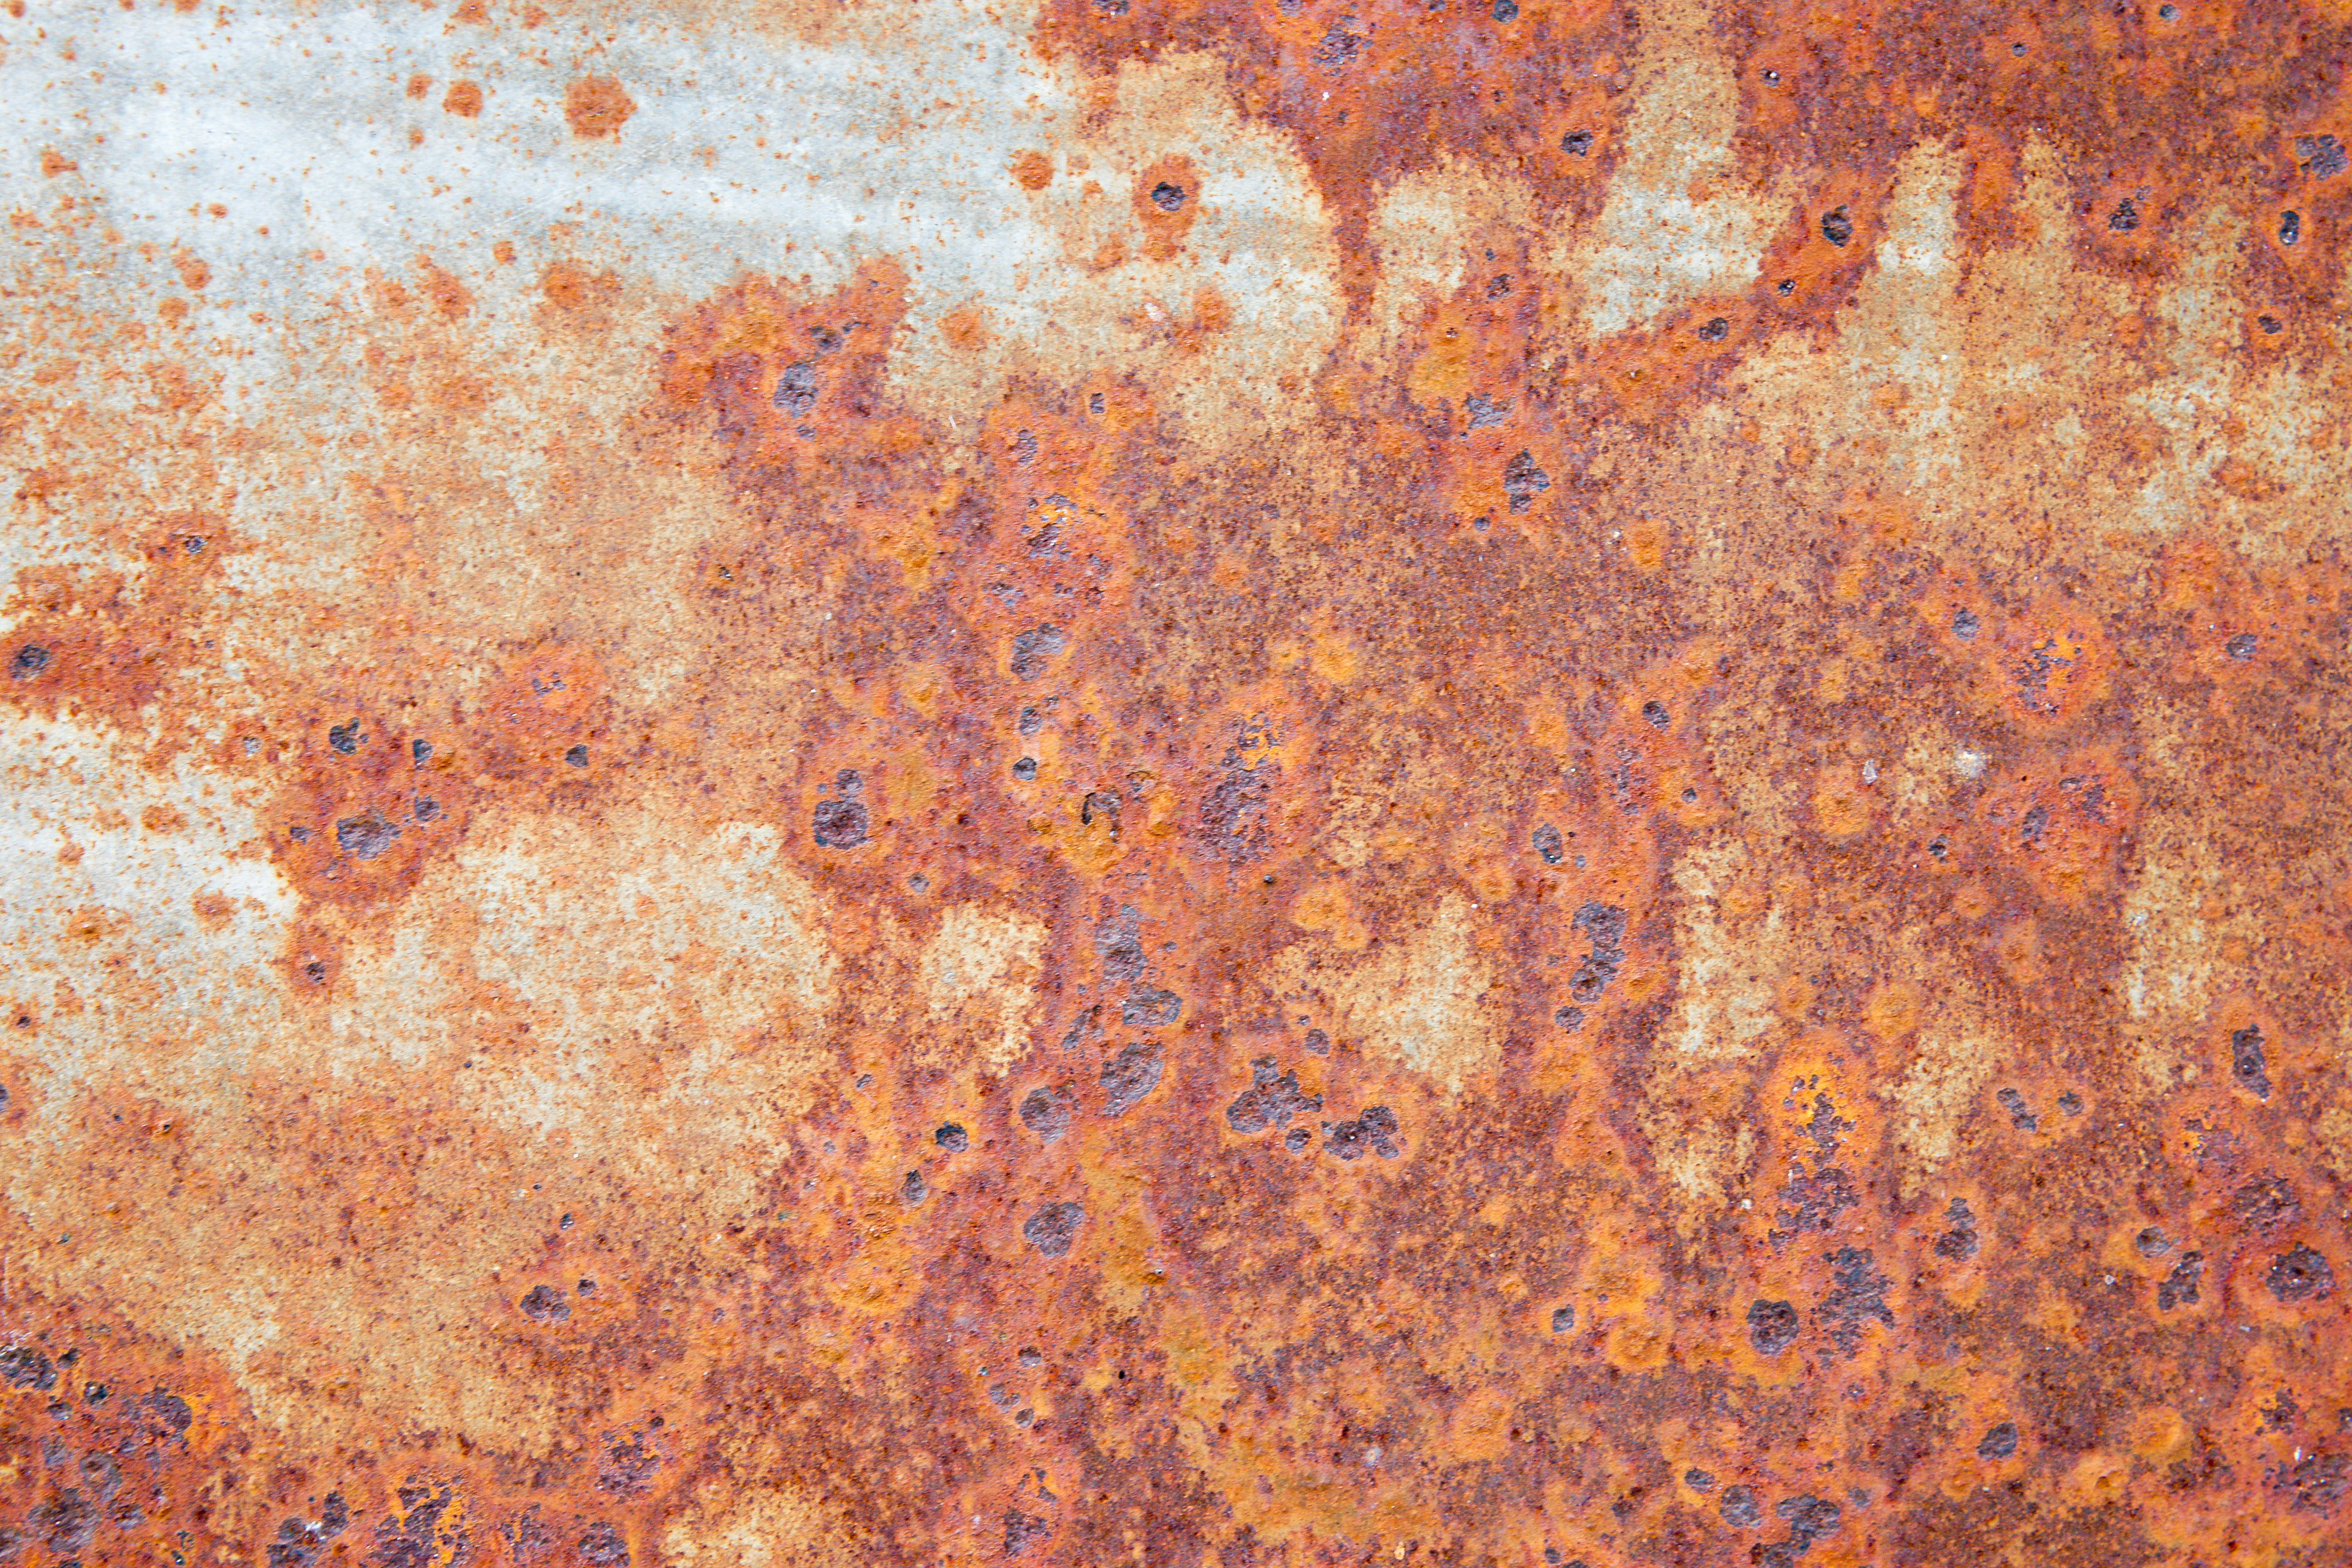 heavily rusted iron metal texture or rust background | www